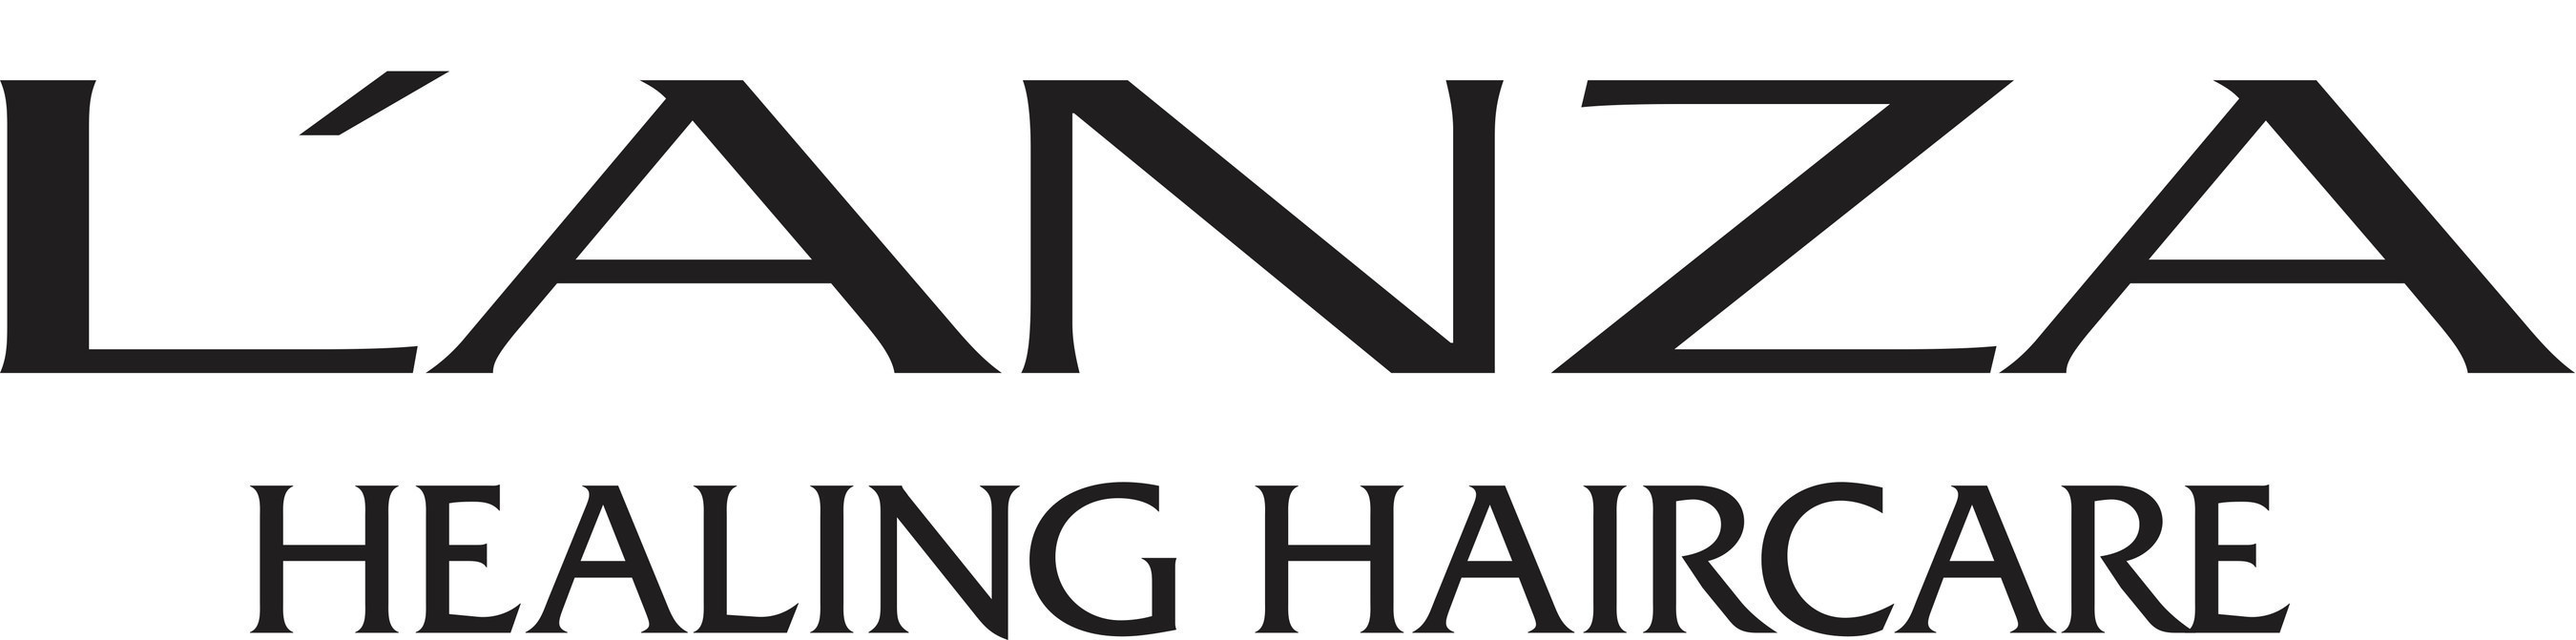 L'ANZA HEALING HAIRCARE ANNOUNCES BRAND EXPANSION LED BY NEWLY APPOINTED CREATIVE DIRECTOR, AMMON CARVER